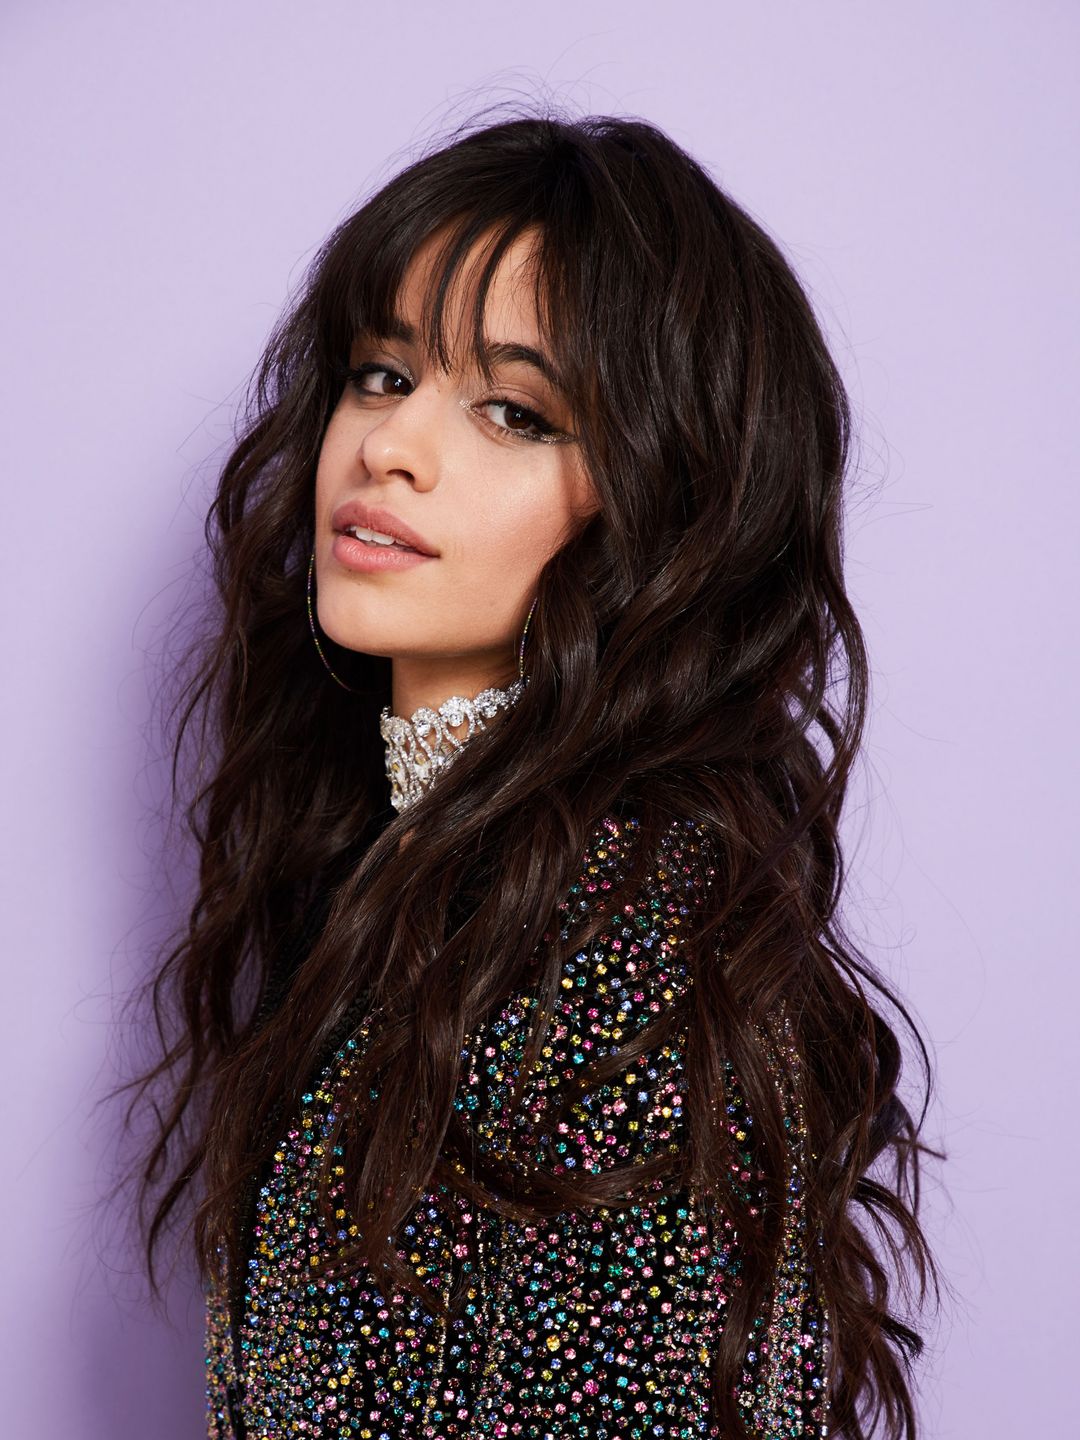 Camila Cabello who is her mother